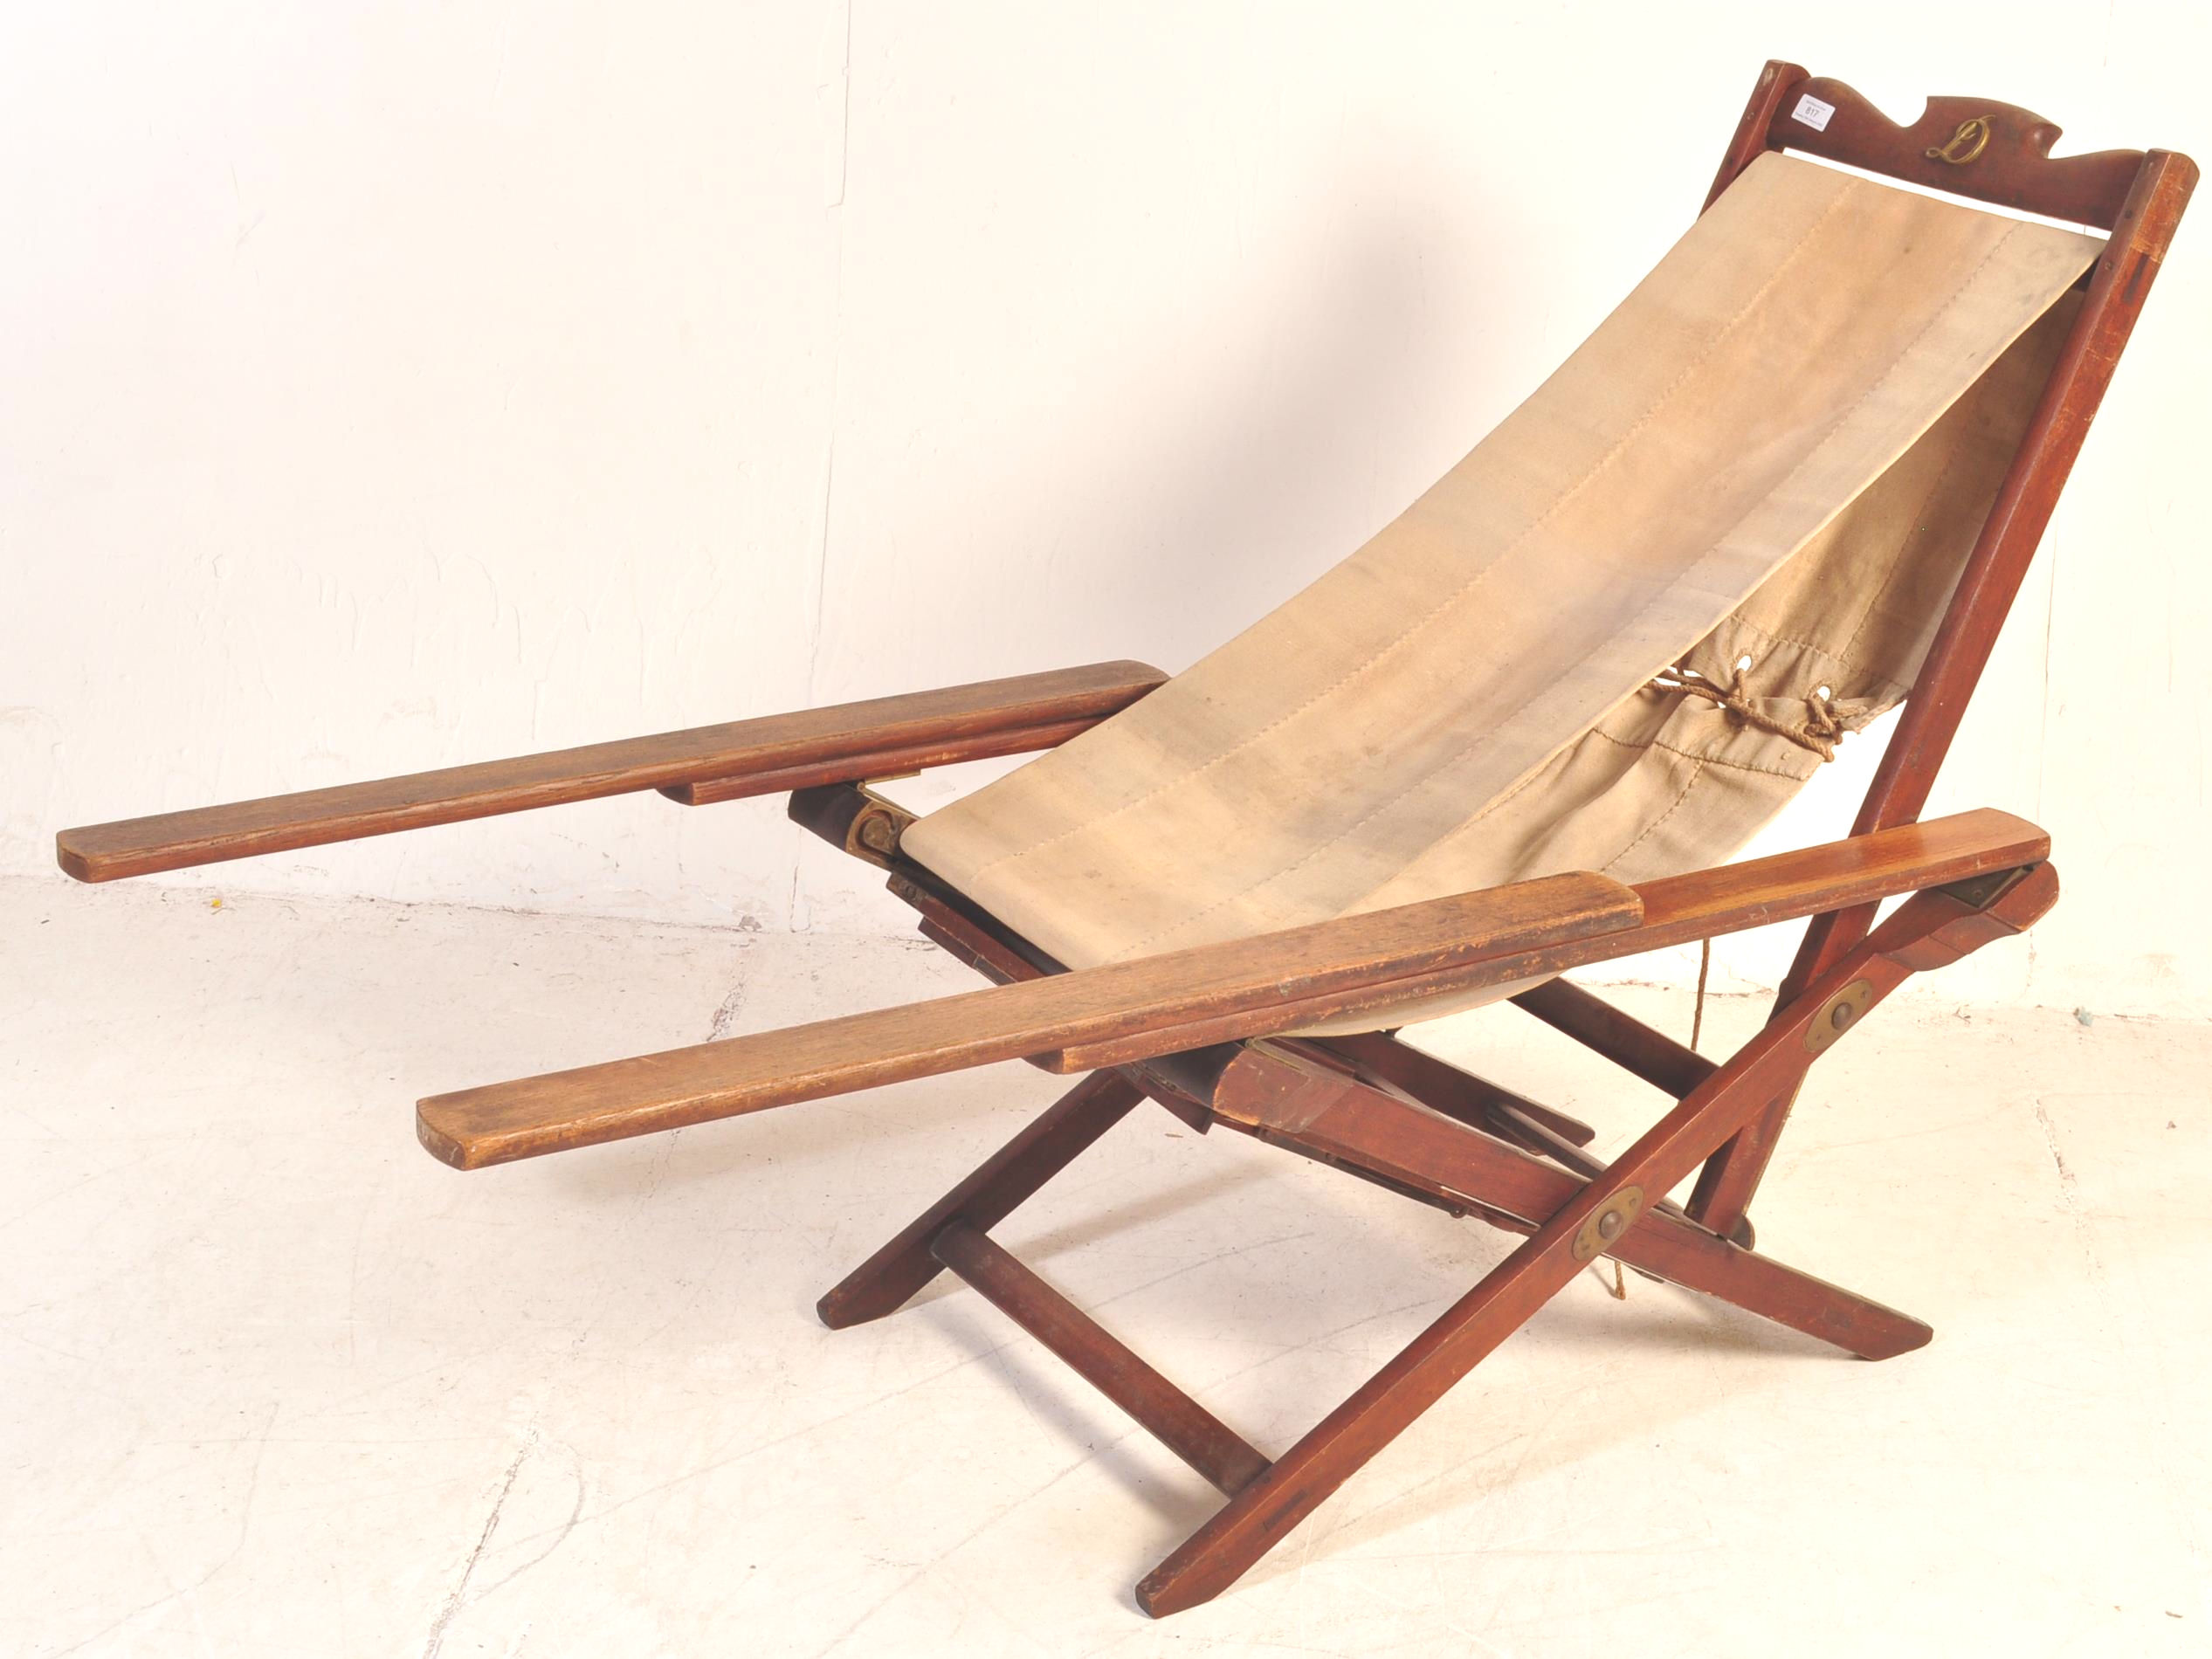 1940S SHIP STEAMER CHAIR - Image 4 of 10